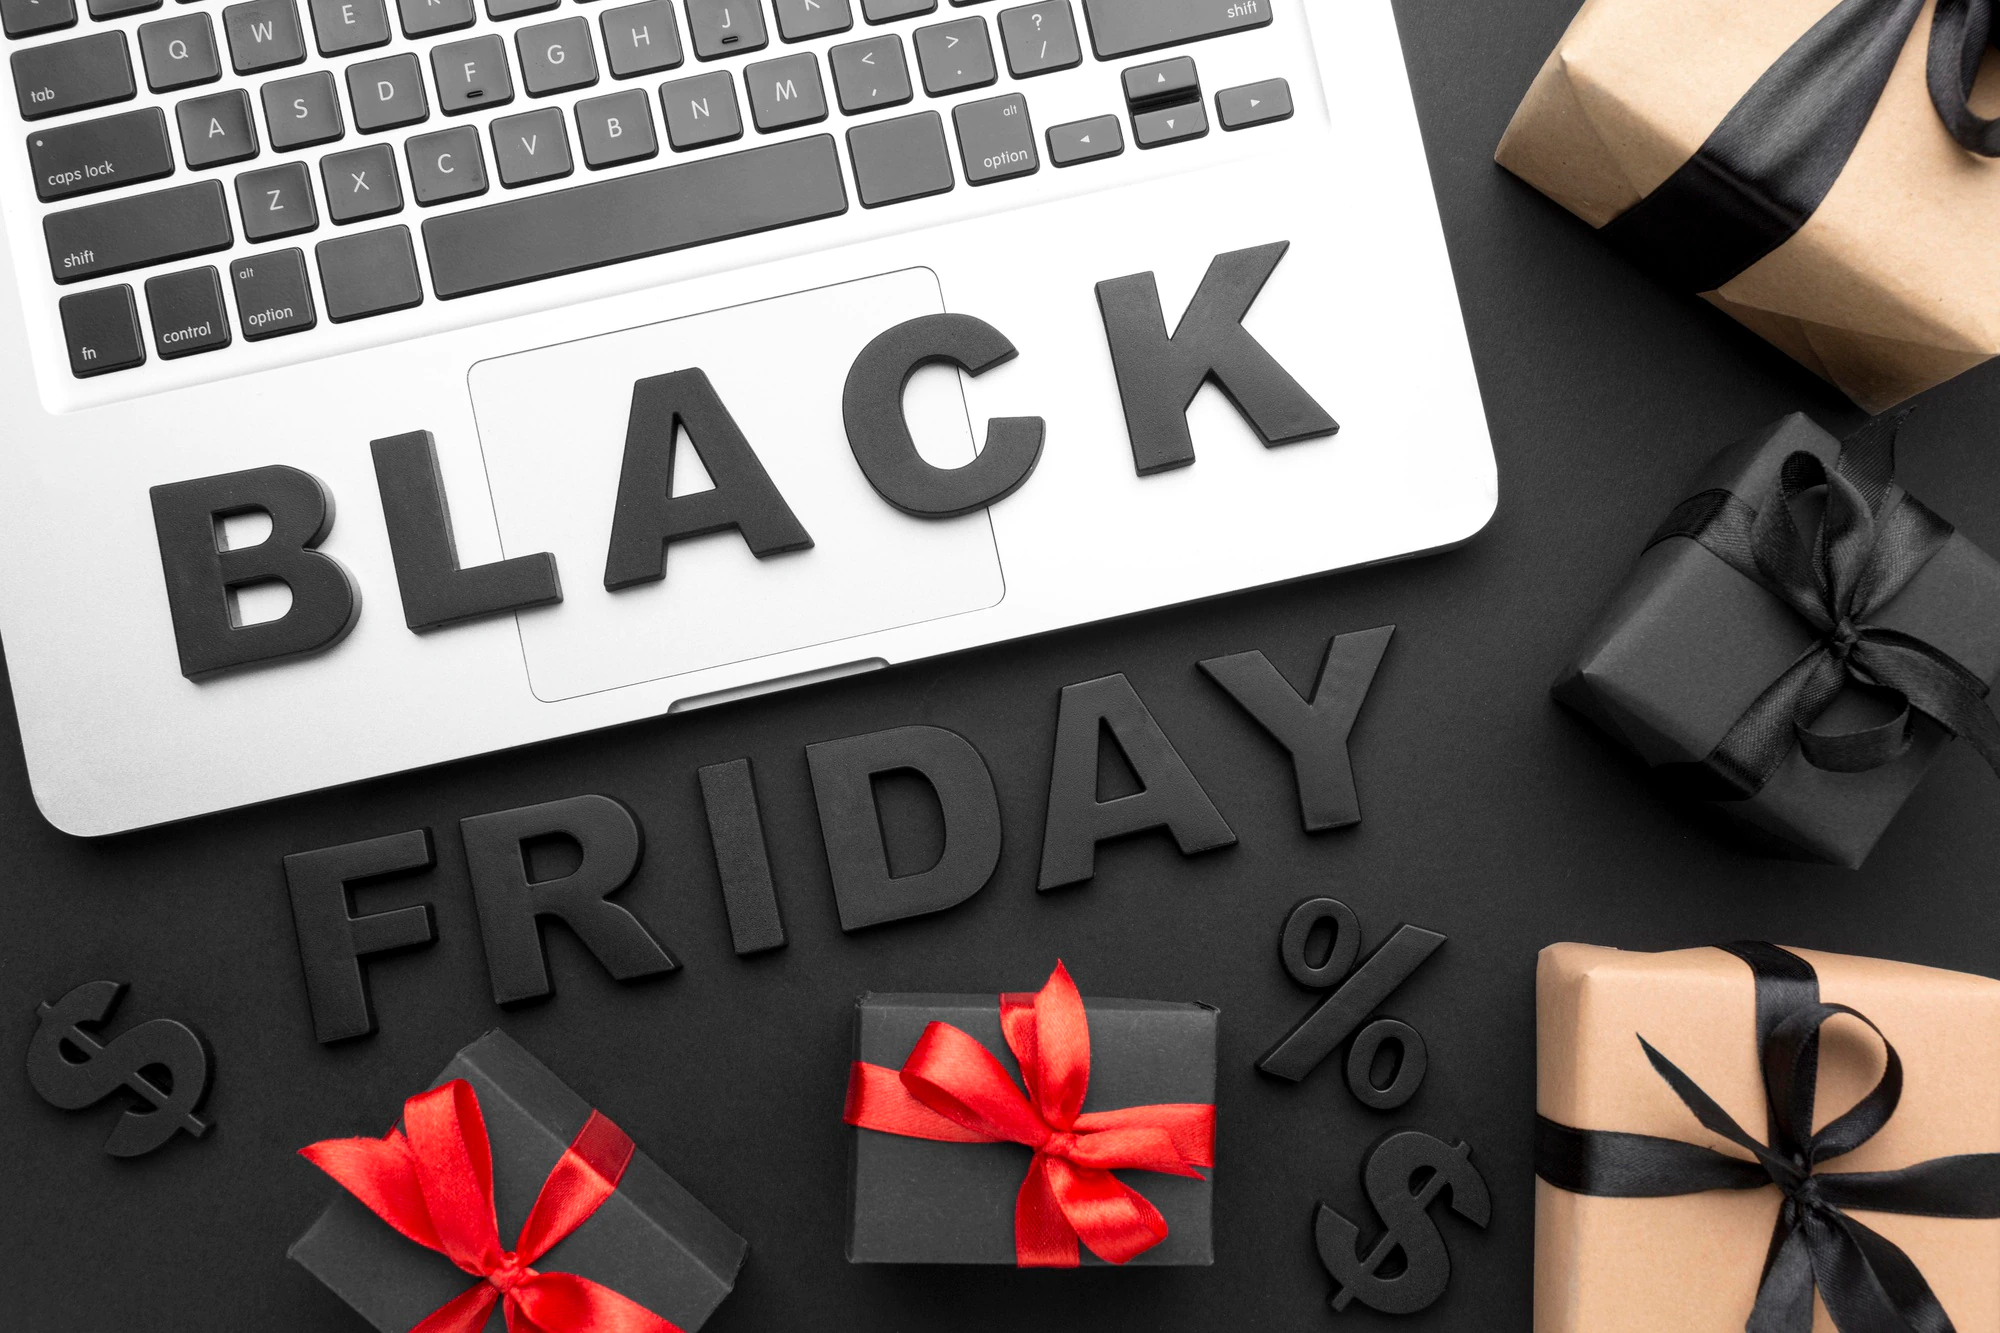 Black Friday 2022: Best Instagram Captions, Facebook Messages, Twitter Memes, Reddit Jokes, Pinterest Images, And WhatsApp Stickers to Share